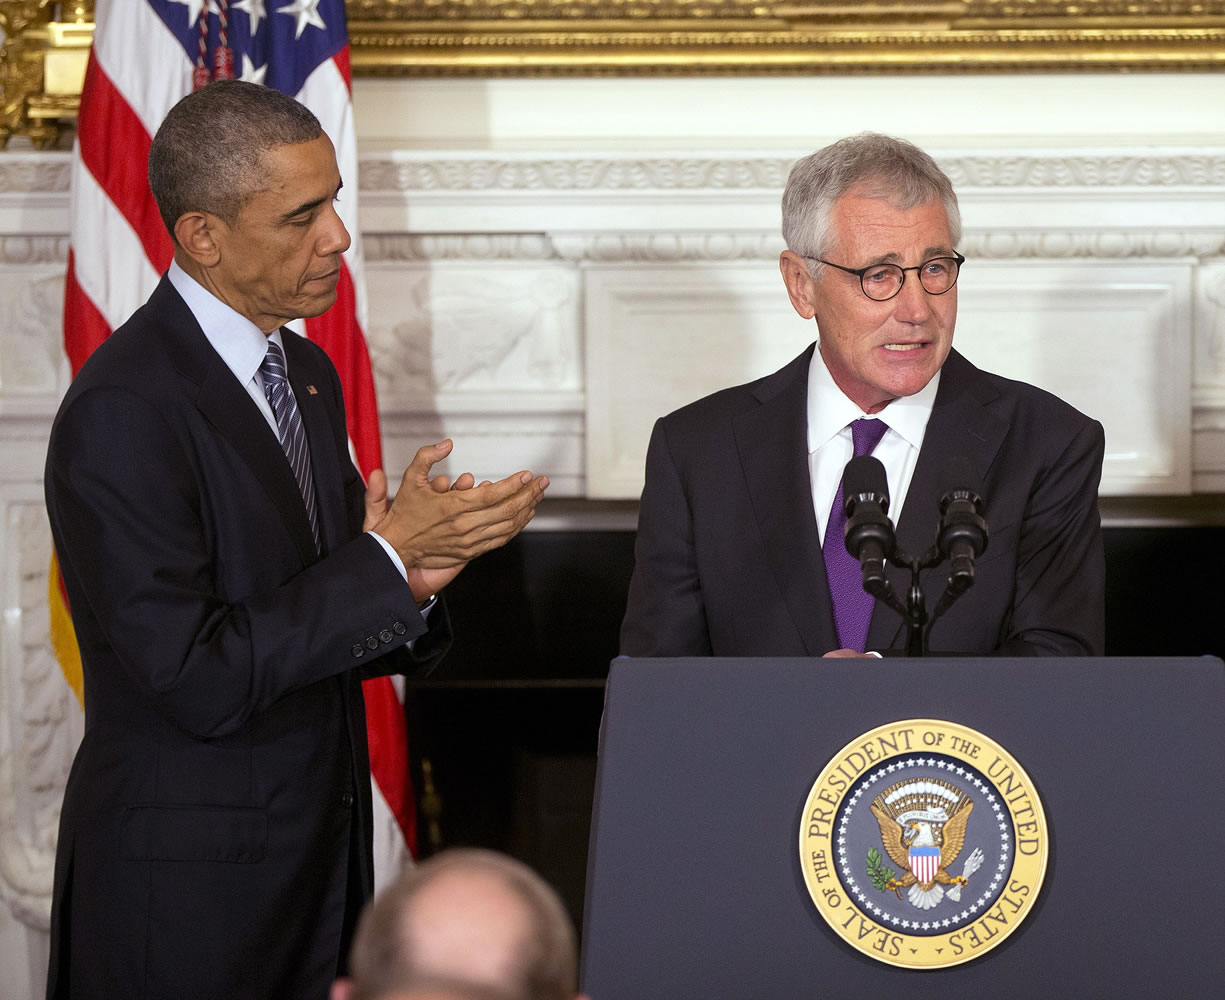 President Barack Obama, left, applaudes Defense Secretary Chuck Hagel, right, in the State Dining Room of the White House in Washington on Monday.